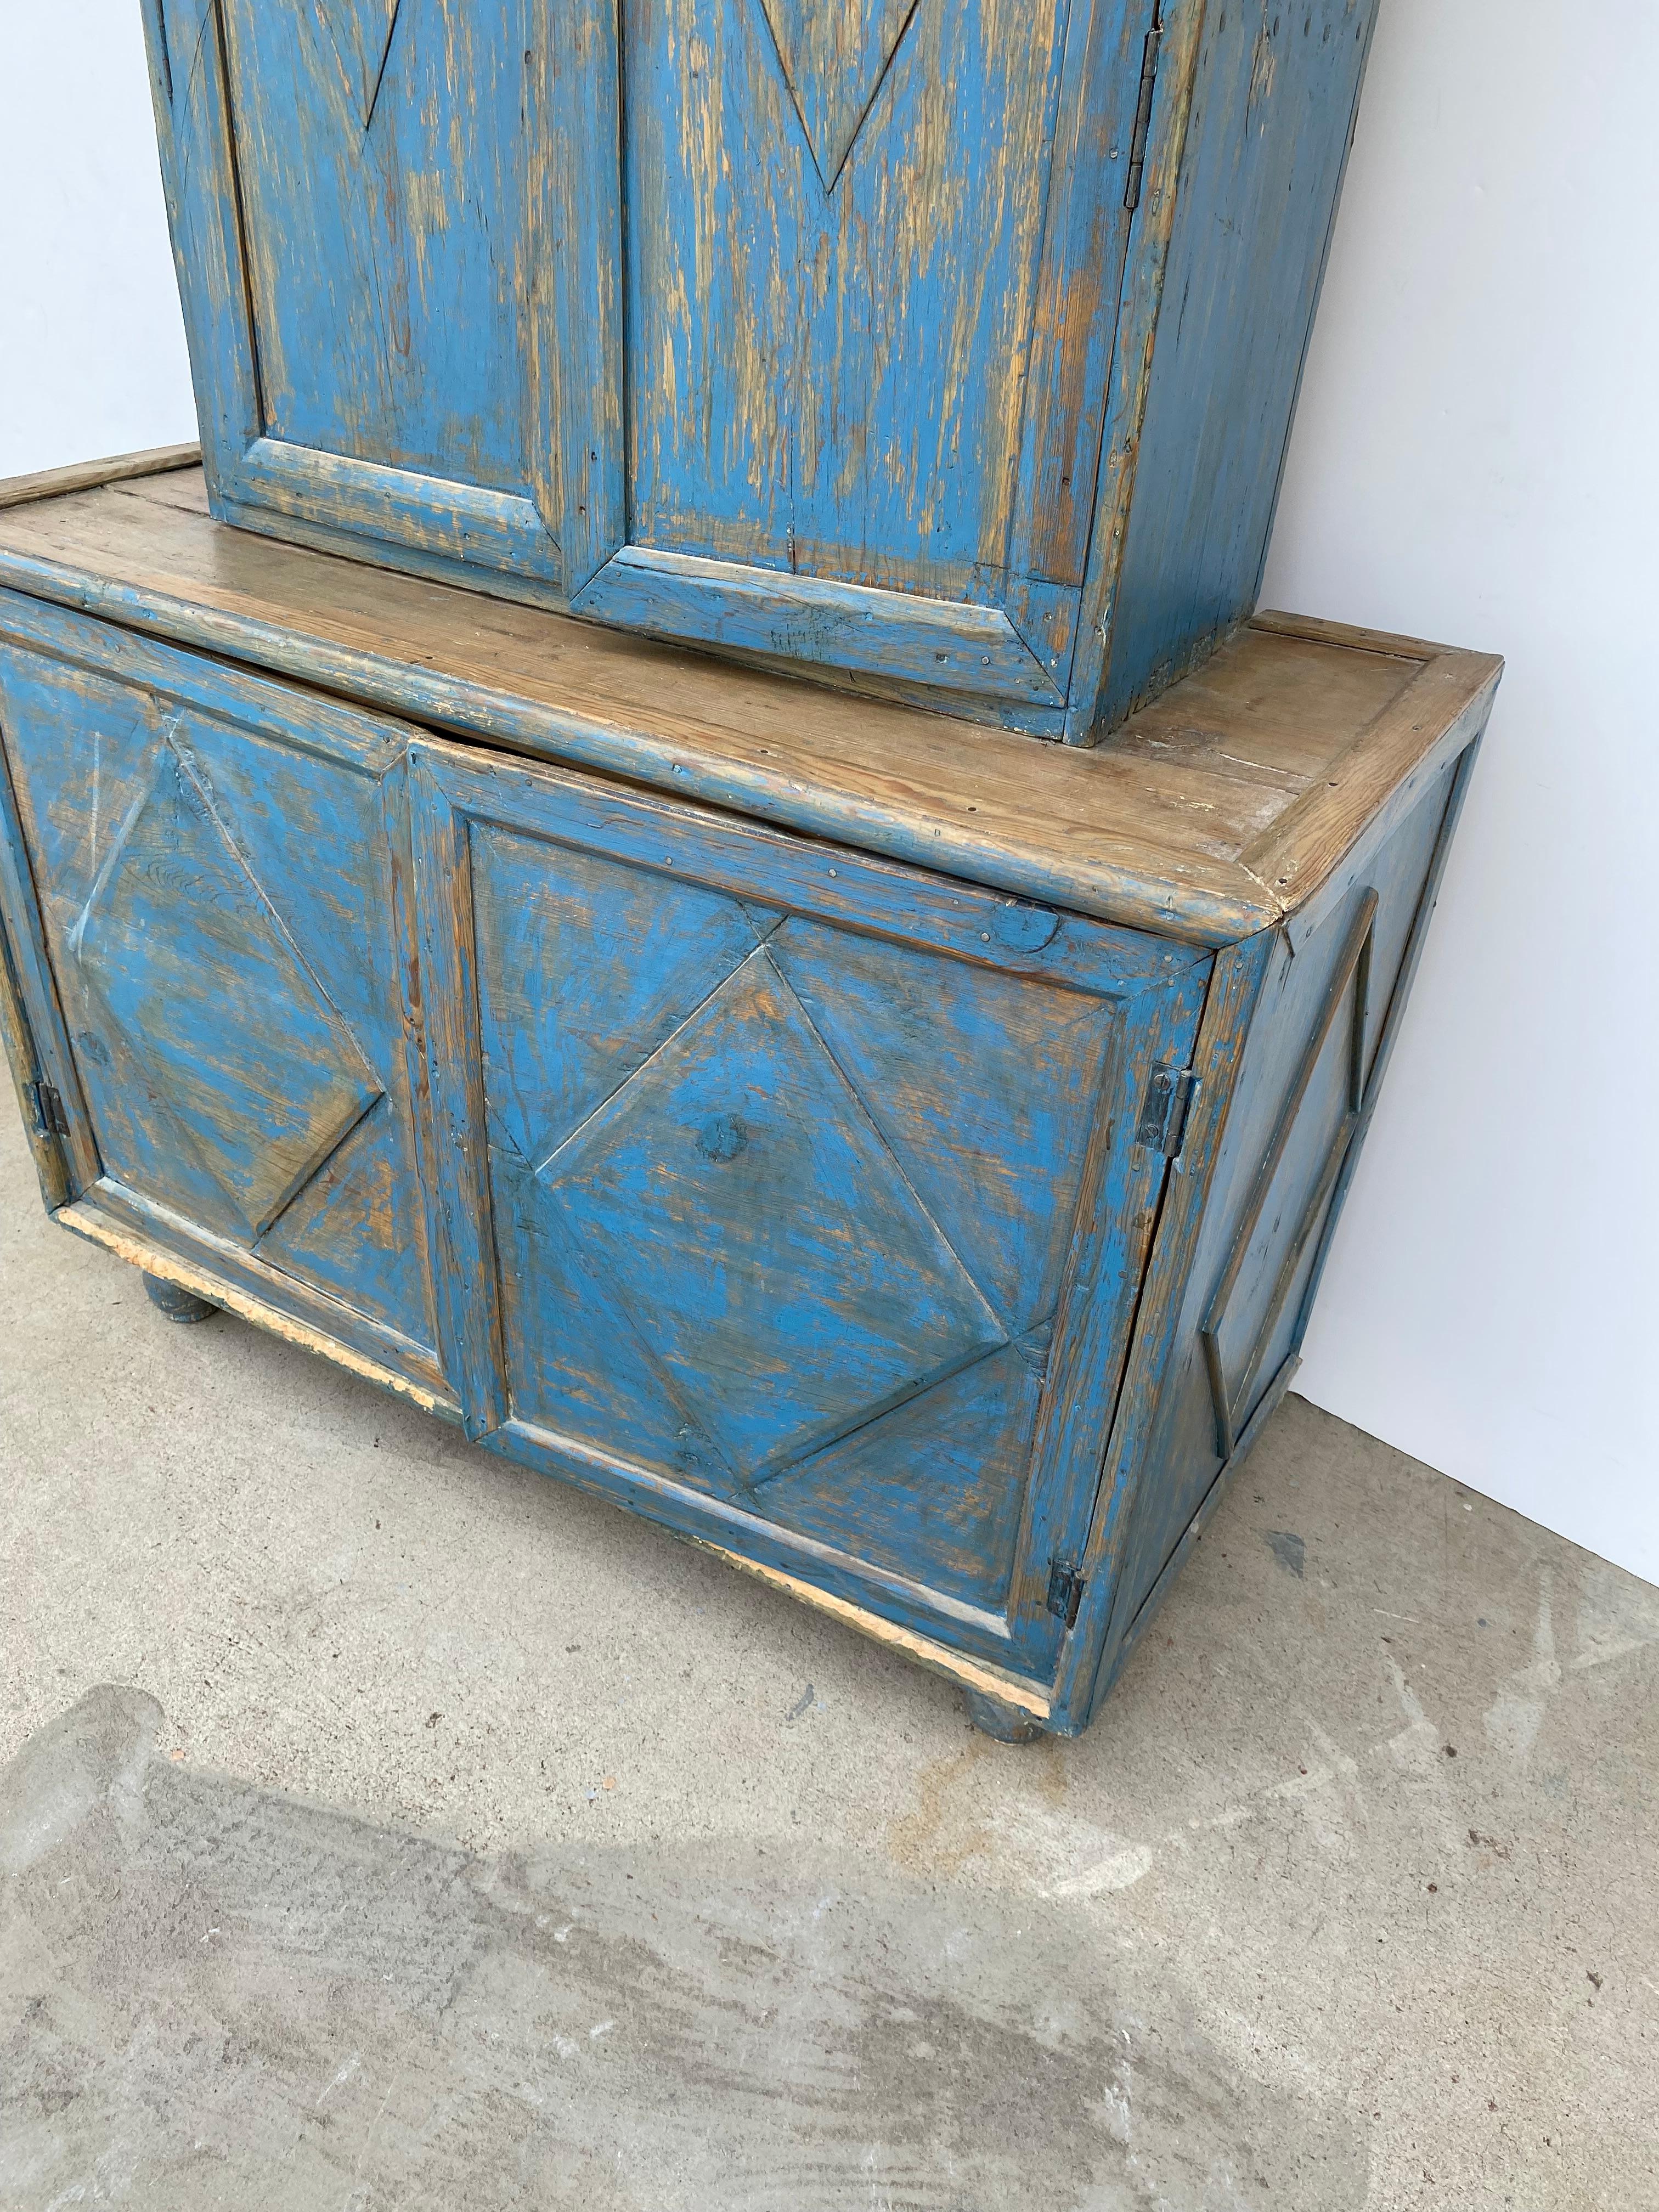 19th-century painted primitive cabinet. The top has two doors with a single shelf bottom part has two doors with no shelf.